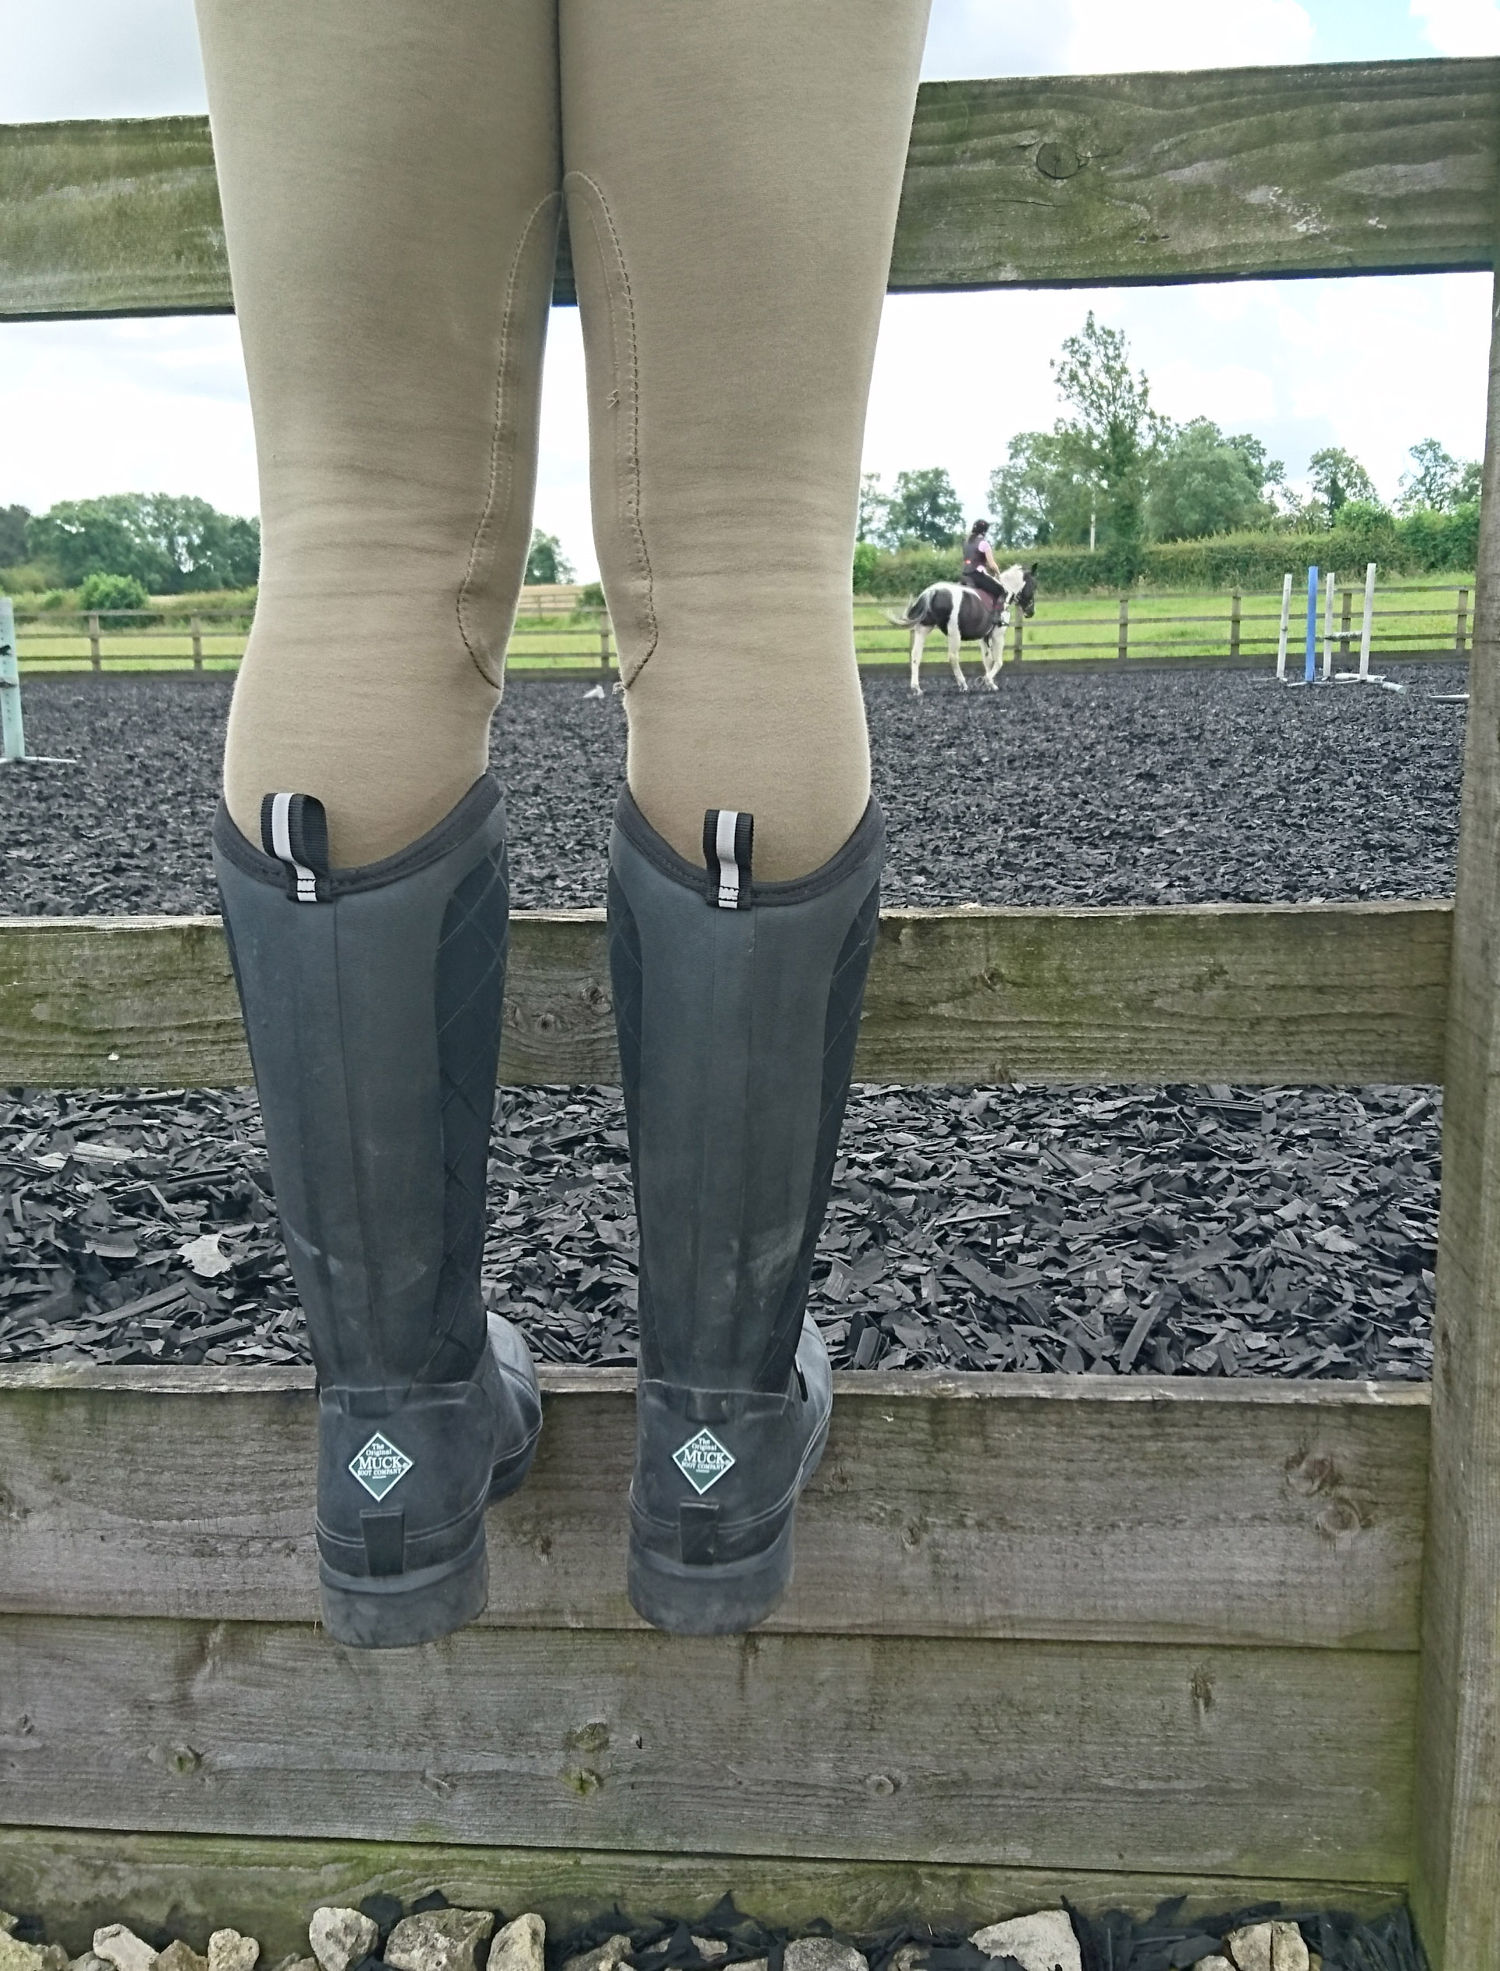 Pacy II Riding Boots from The Original Muck Boot Company - Review